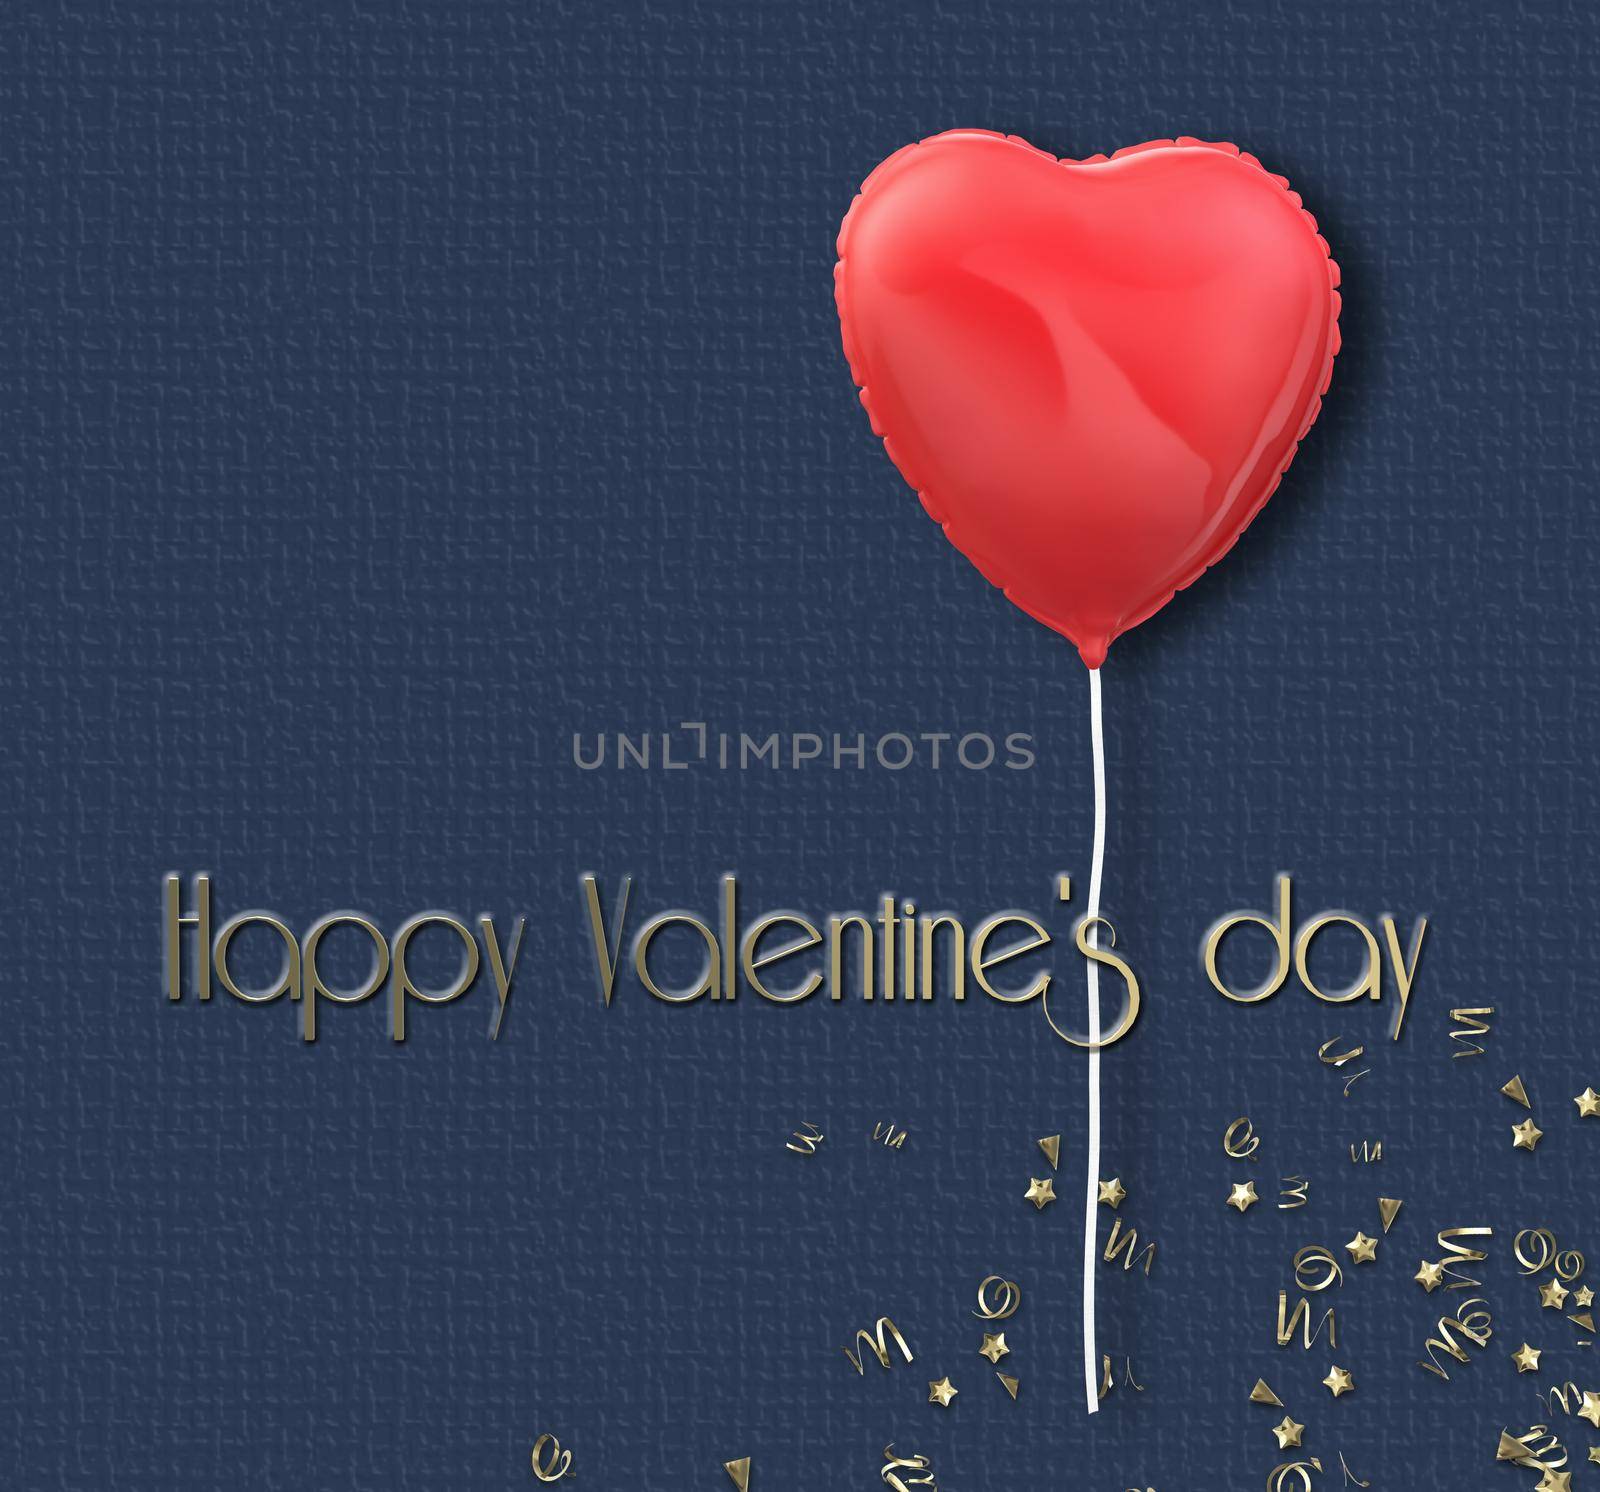 Valentines day background with Heart Shaped red Balloon. text Happy Valentine's day. 3D illustration